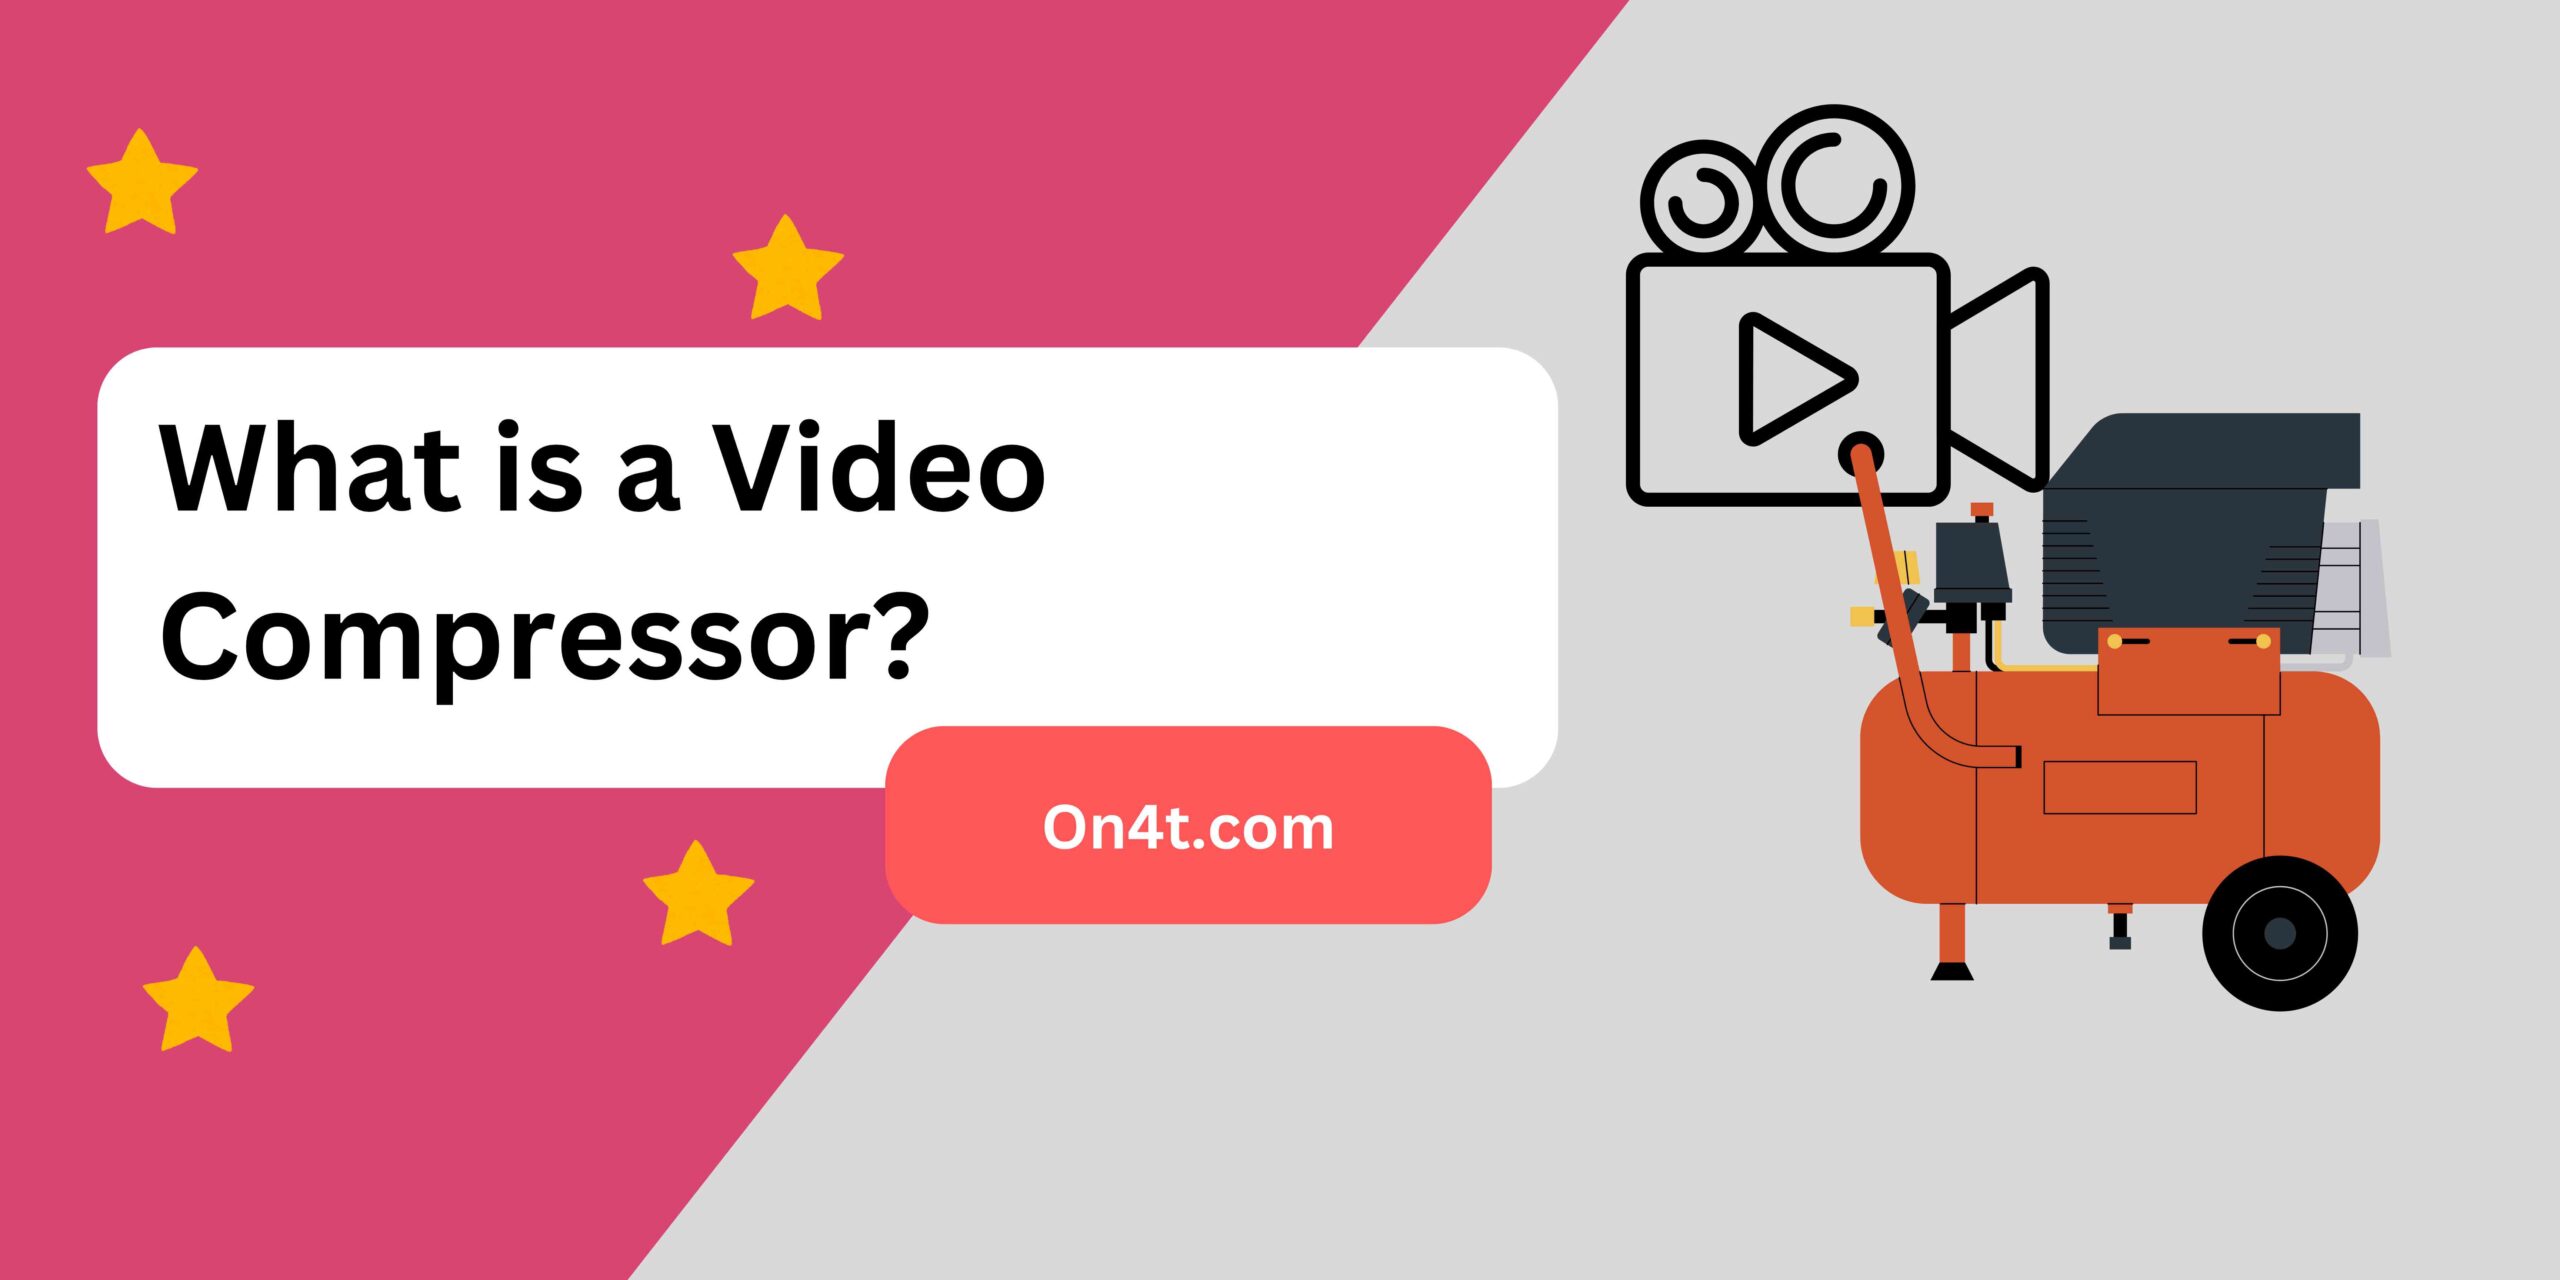 What is a Video Compressor